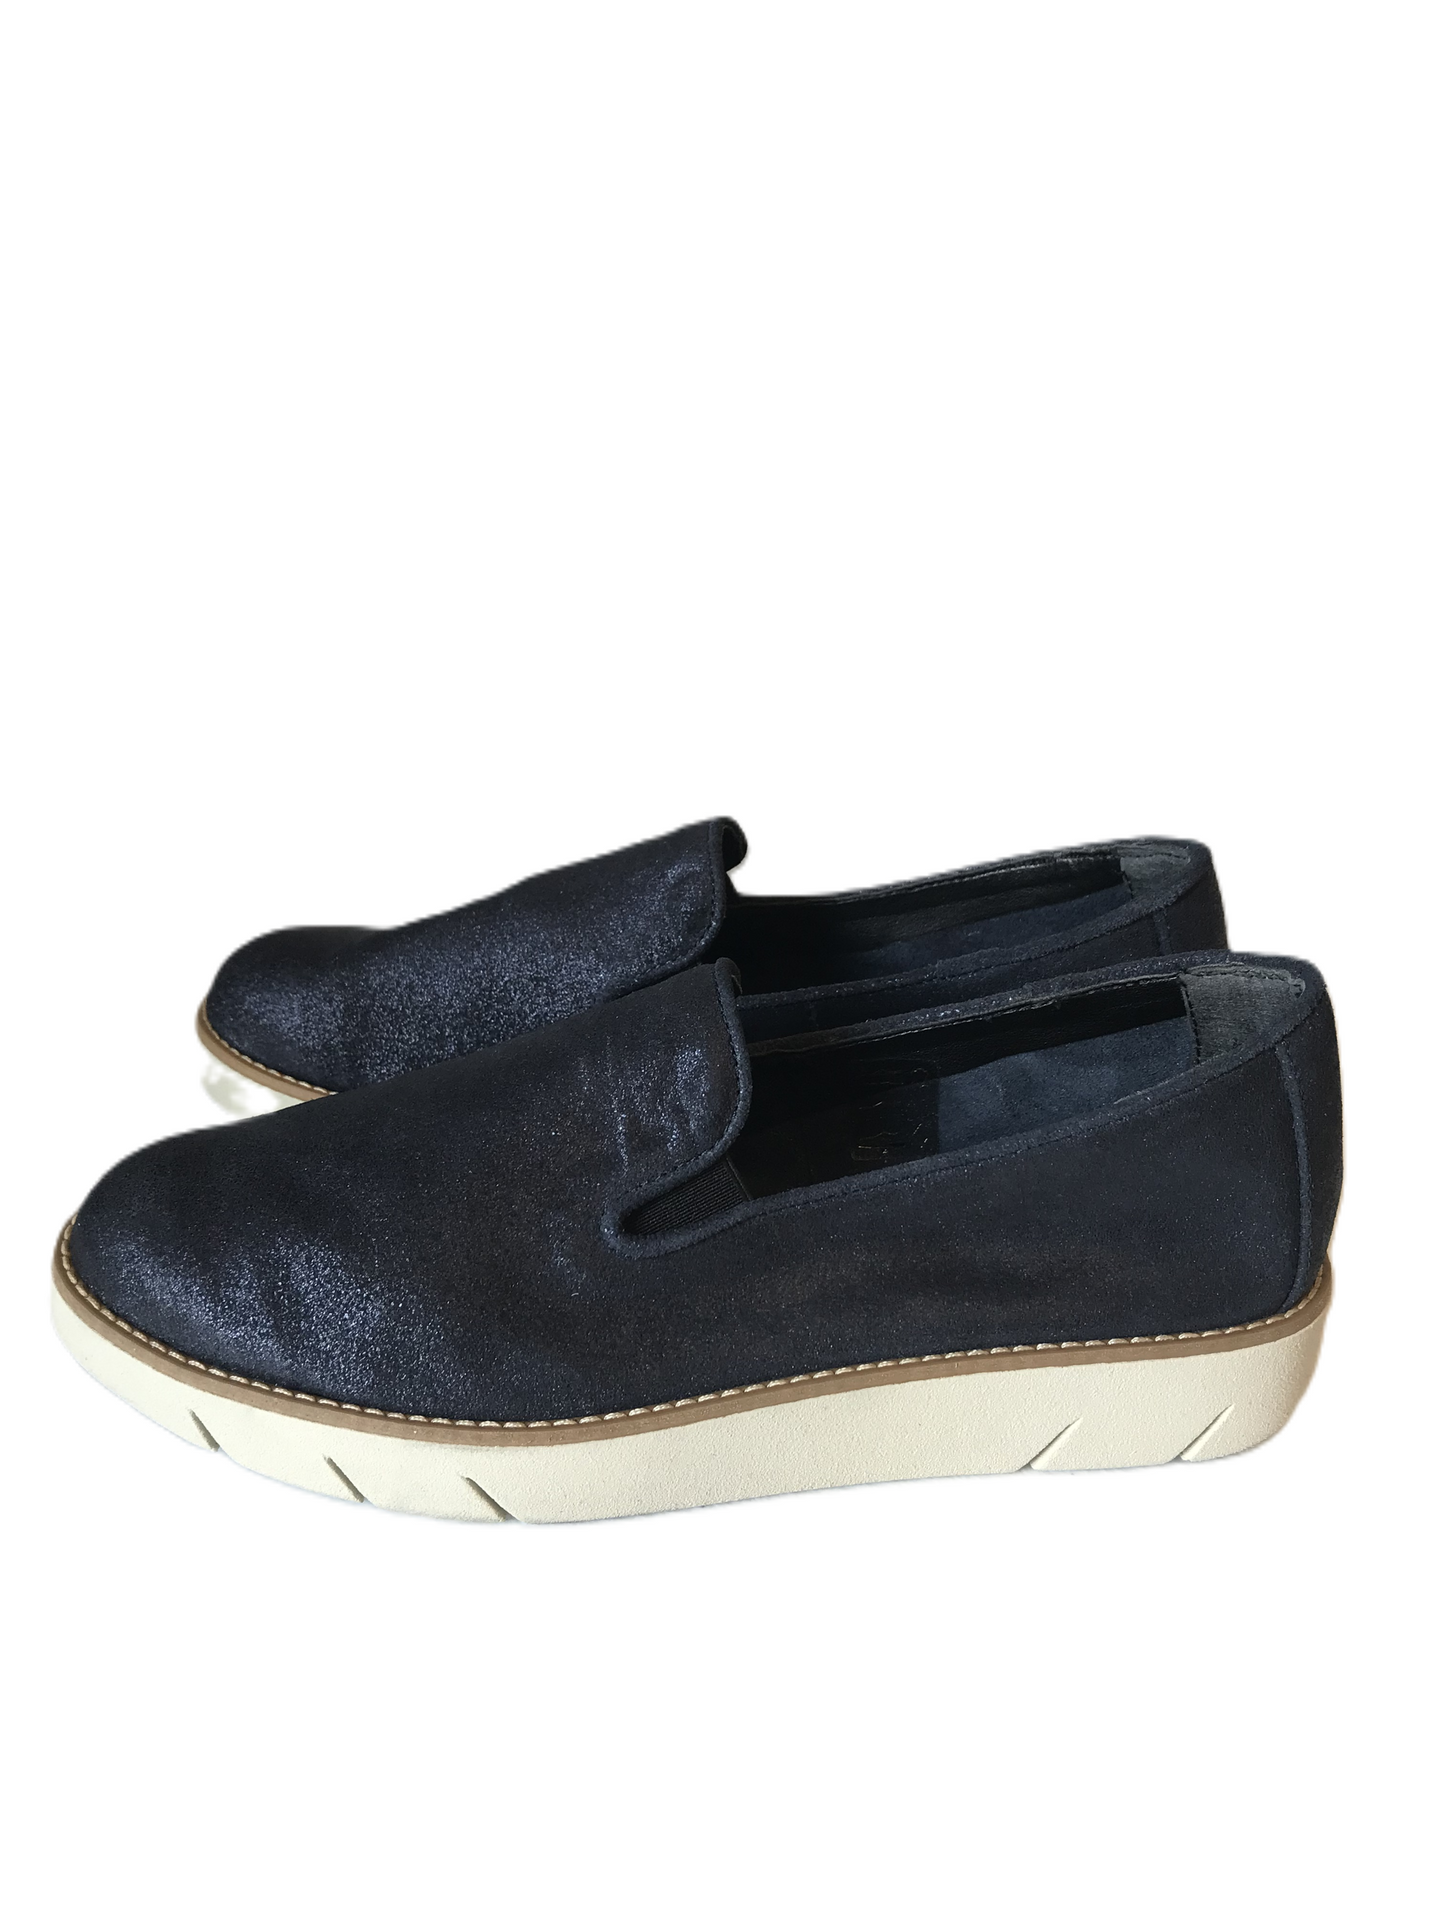 Navy Shoes Flats By The Flexx Size: 8.5